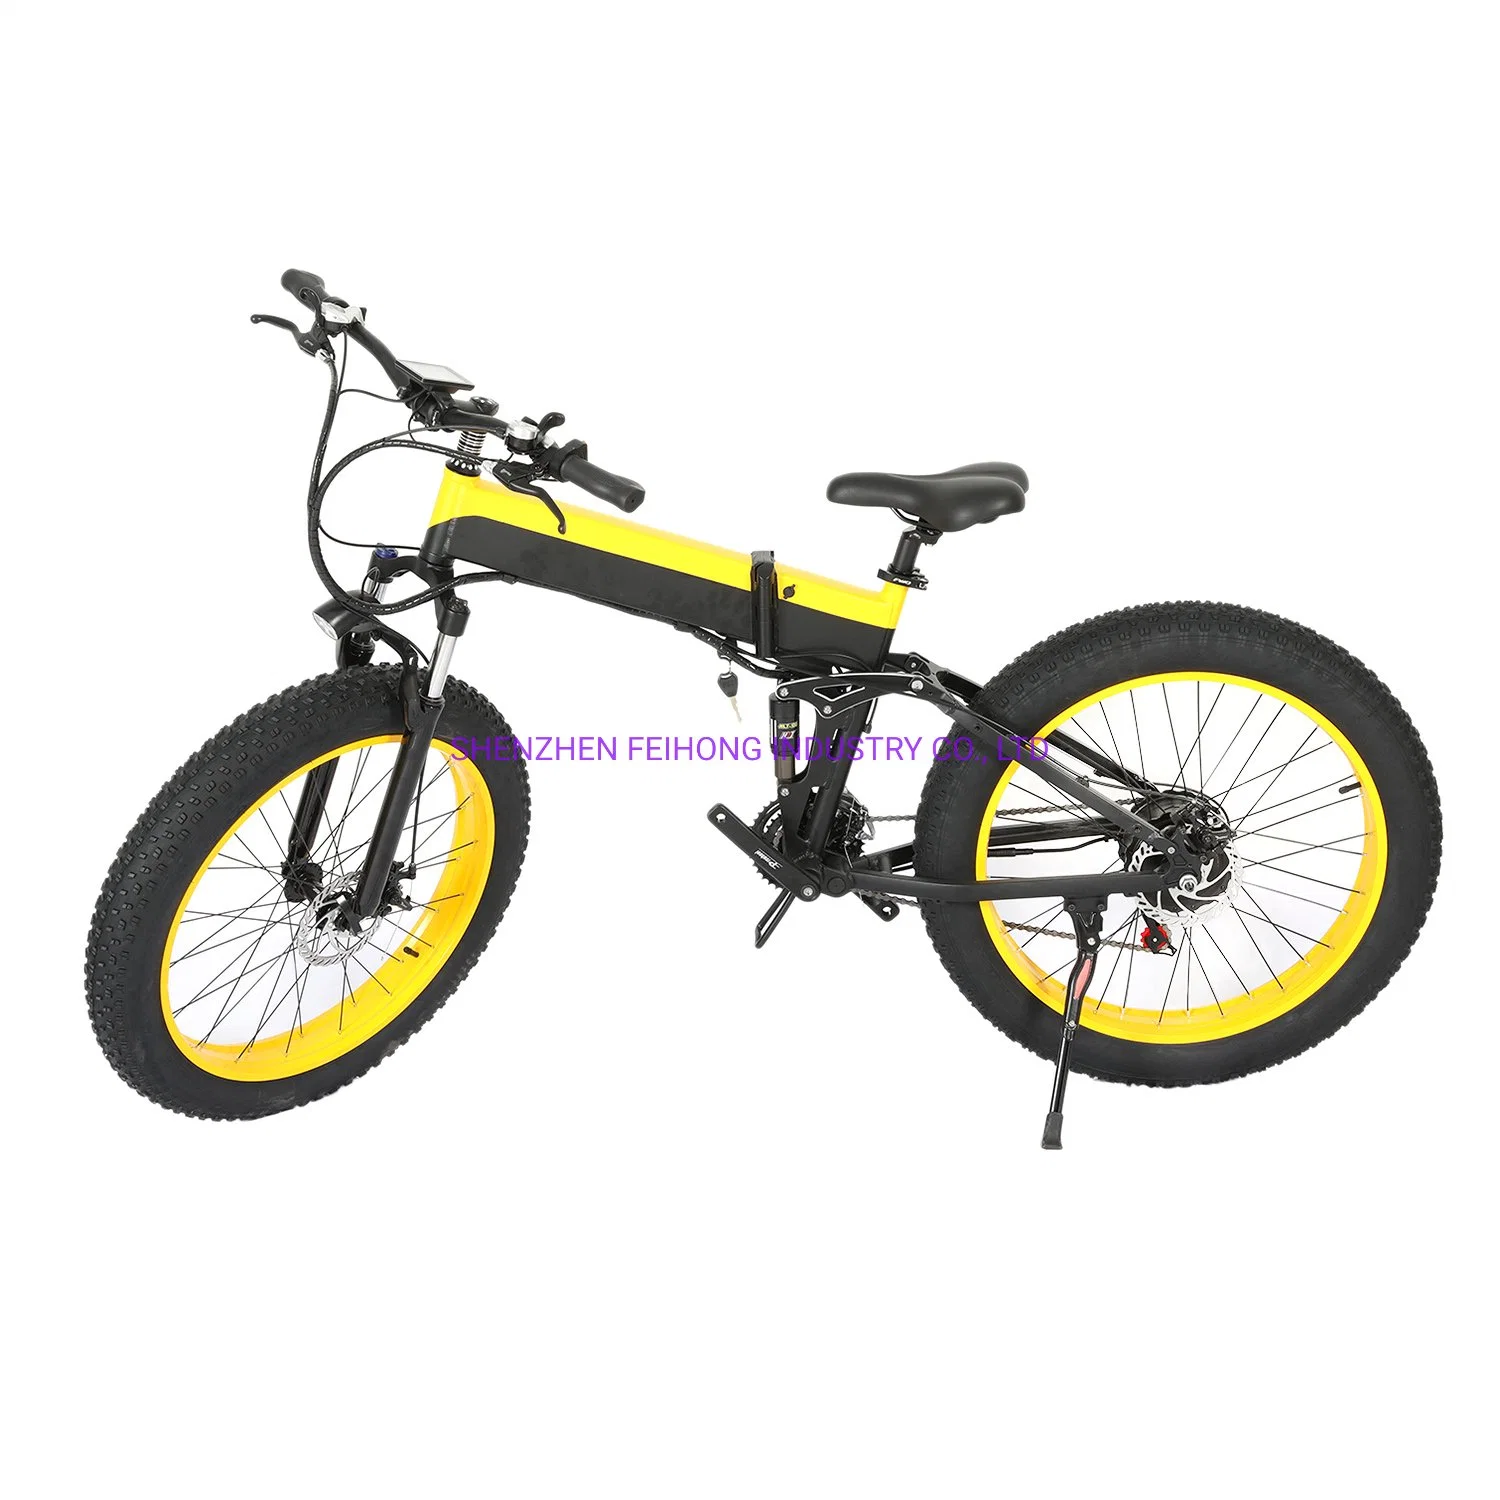 26inch Light Folding Bike Electric City Bicycle Electric Mountain Bike Vehicle Bicycle with 500W Brushless Motor 48V 8.4ah Battery Electric Vehicle E-Bike